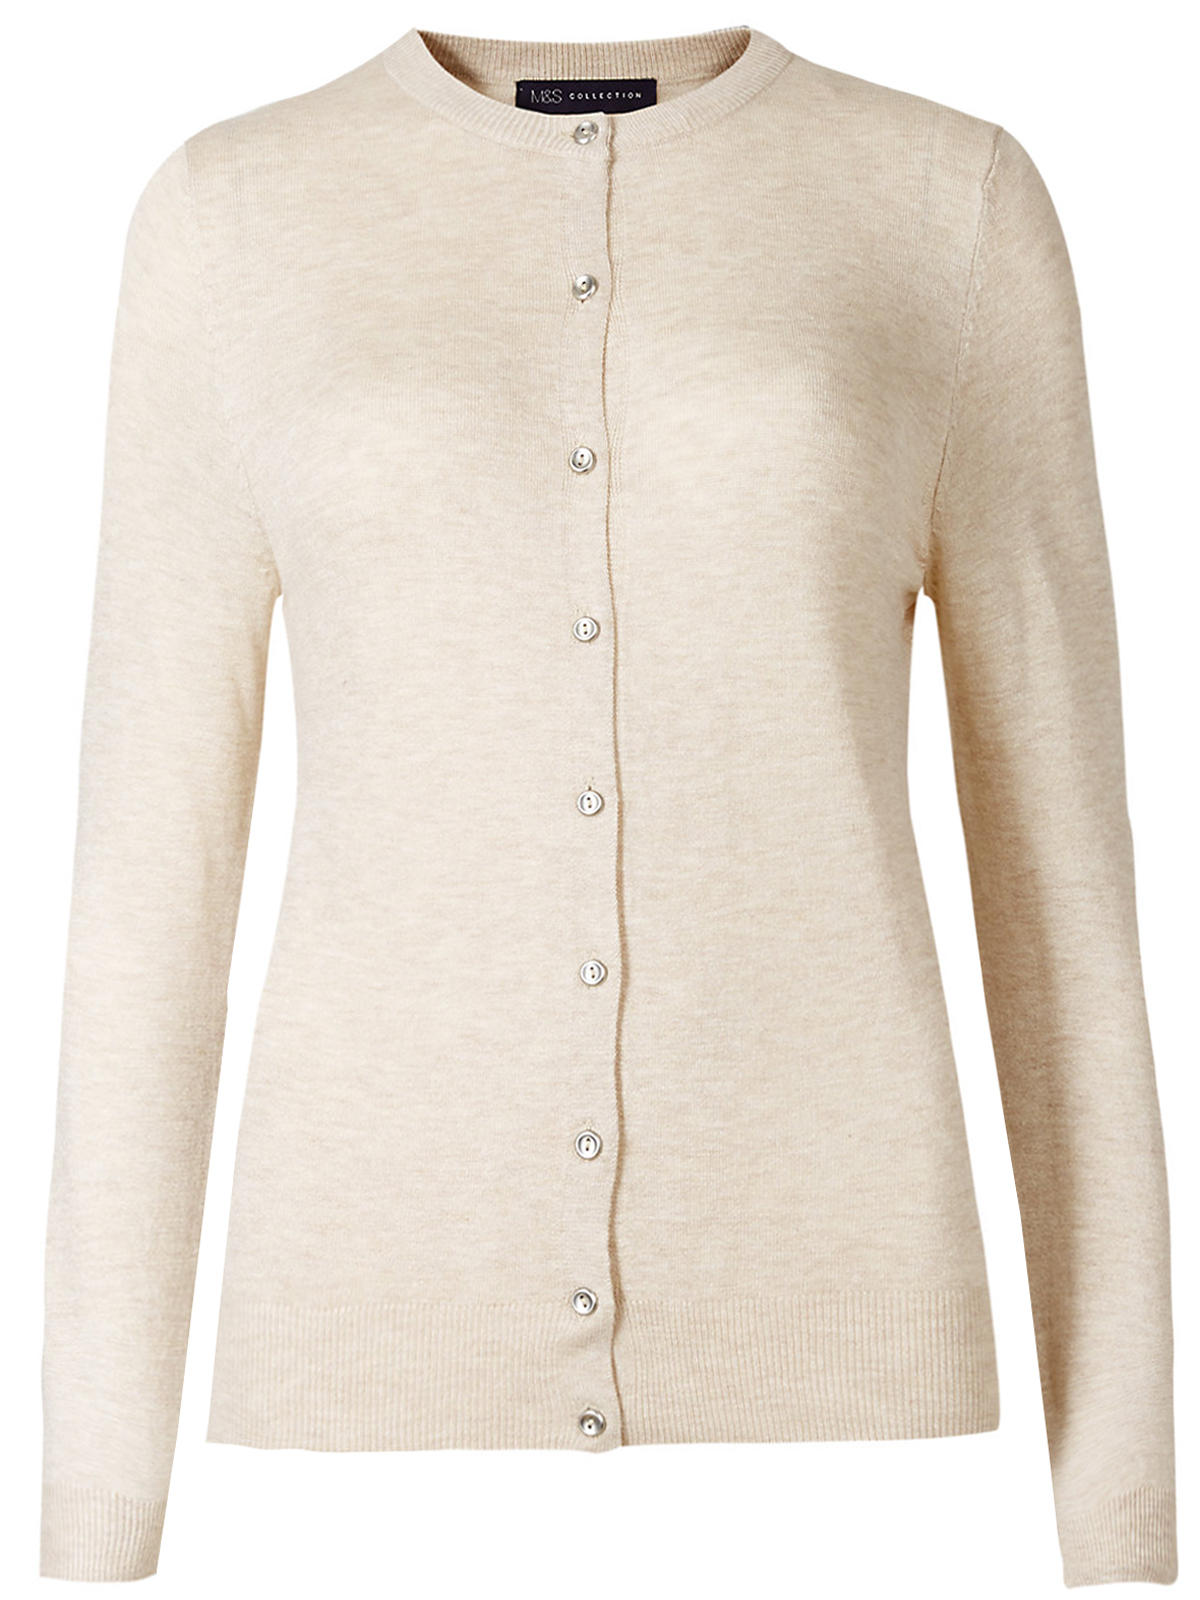 Marks and Spencer - - M&5 OATMEAL Ribbed Round Neck Button Through ...